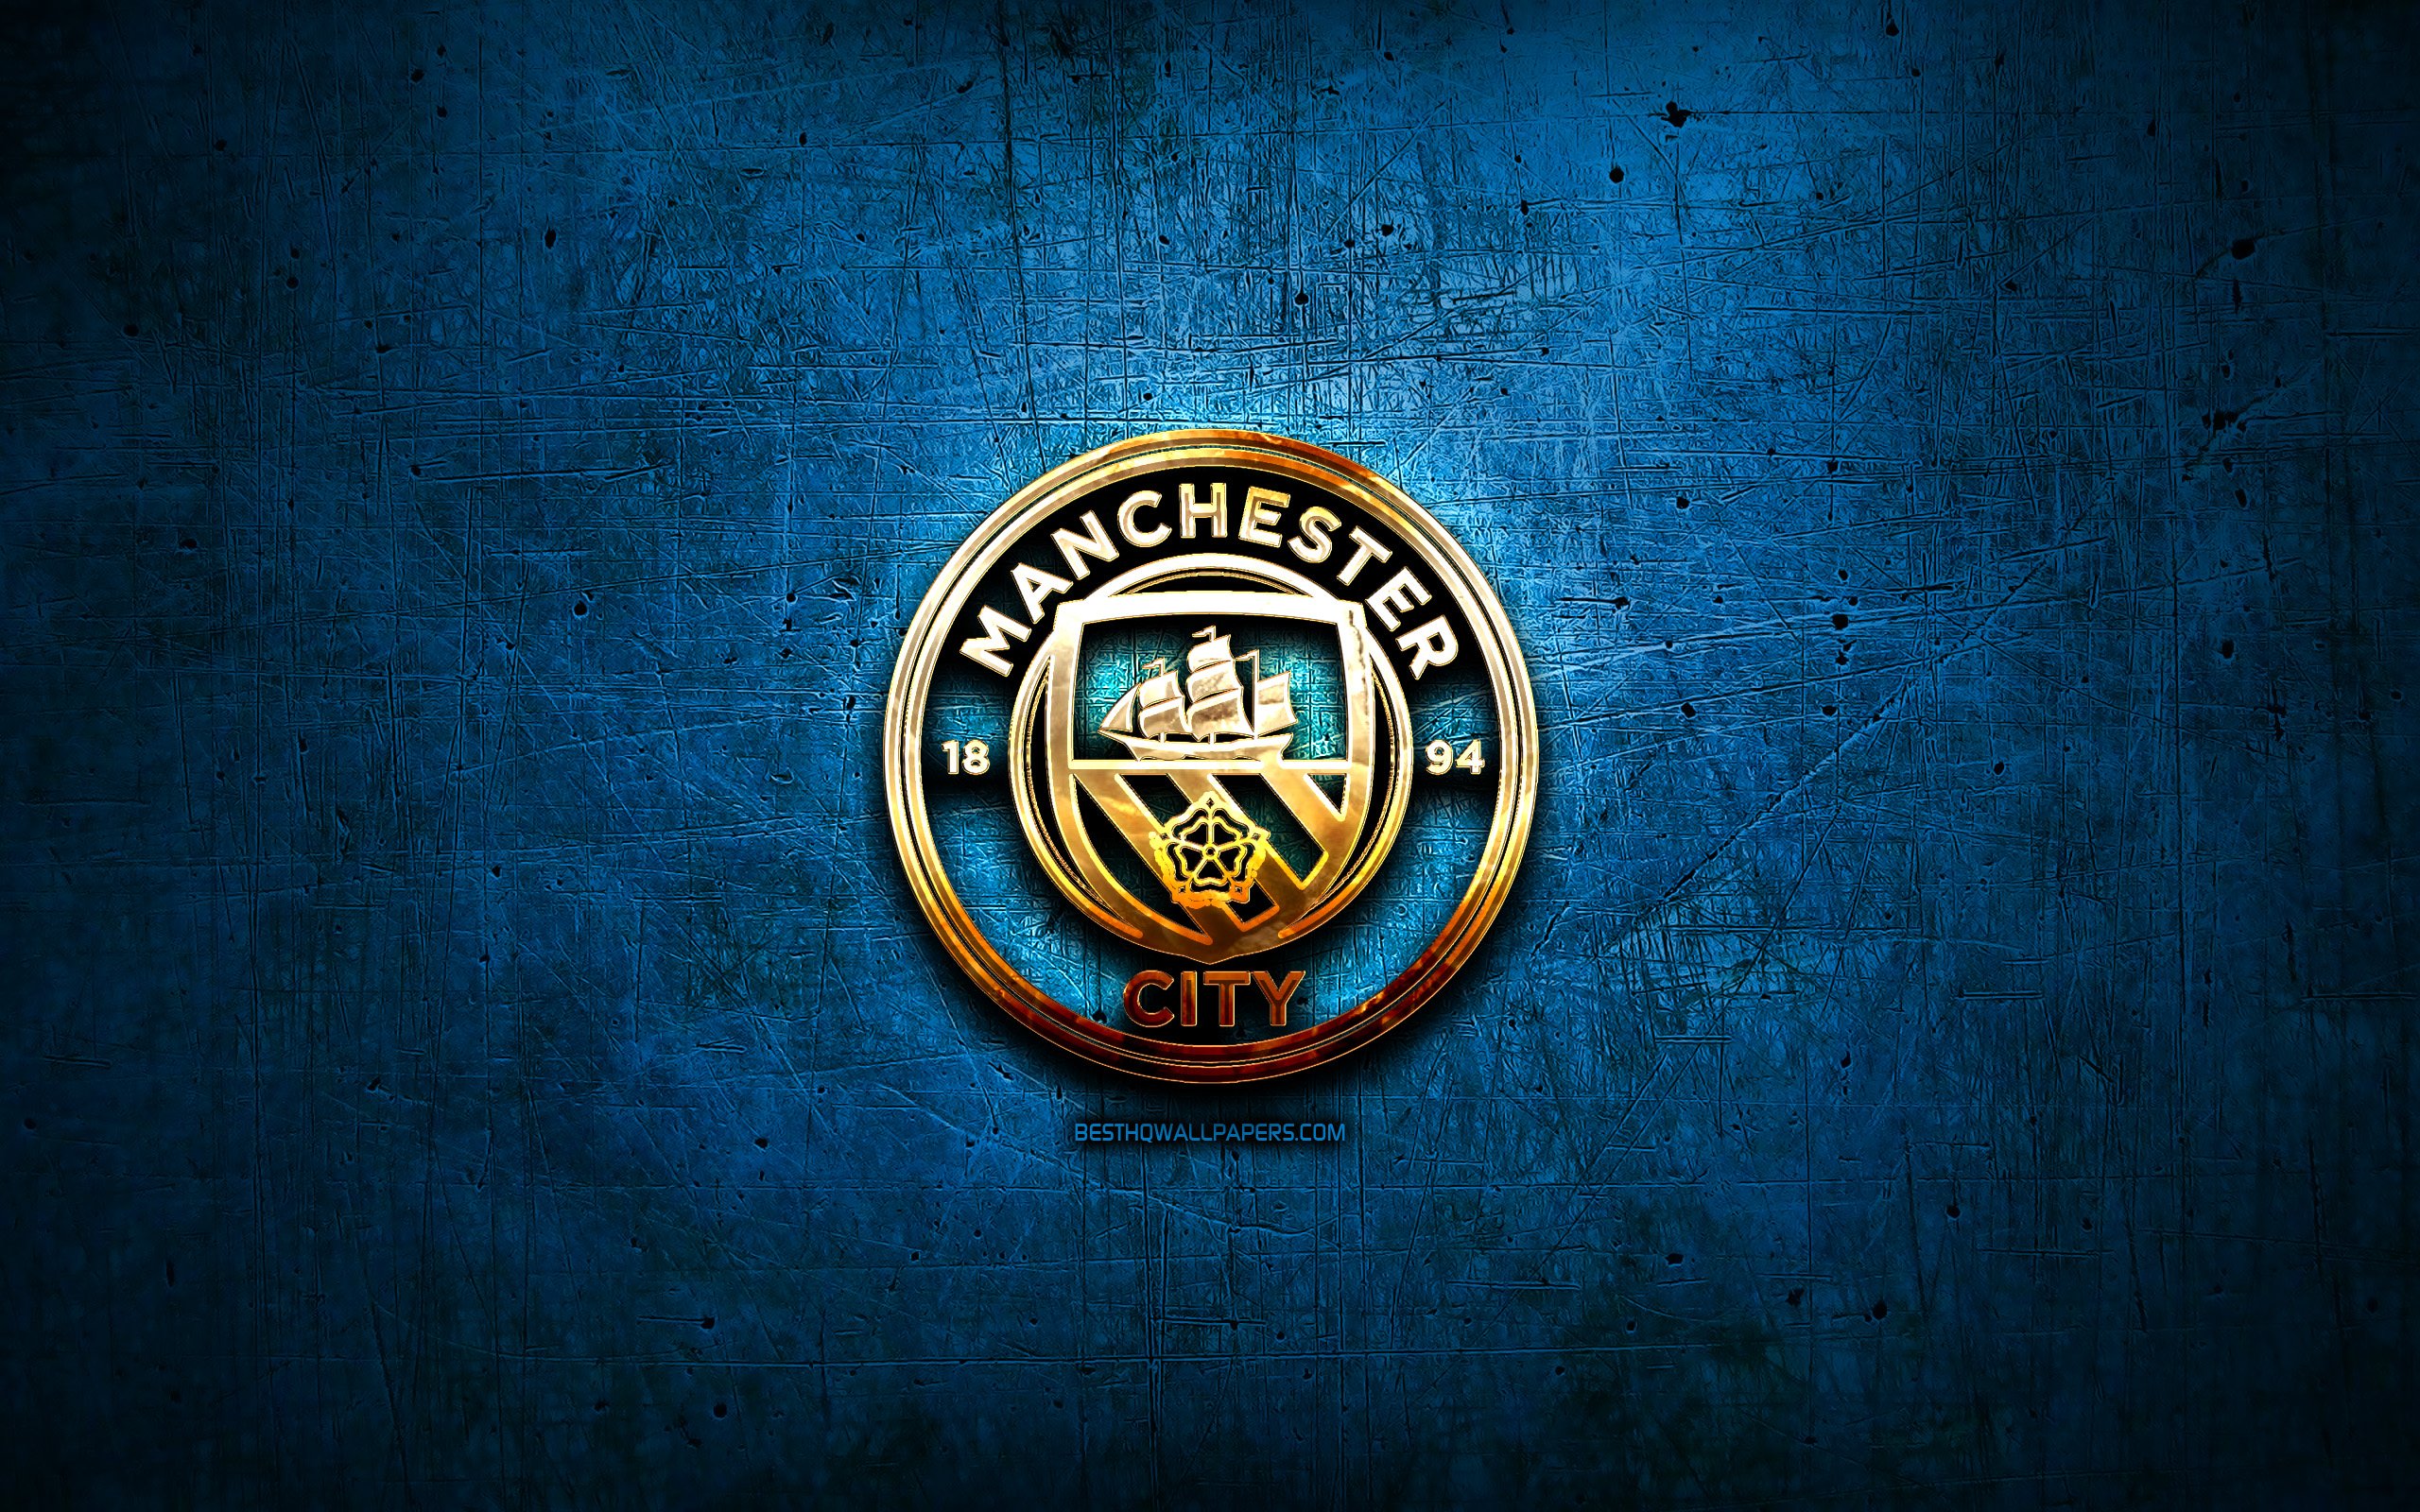 Download wallpapers Manchester City FC, golden logo, Premier League, blue  abstract background, soccer, english football club, Manchester City logo,  football, Manchester City, England for desktop with resolution 2560x1600.  High Quality HD pictures